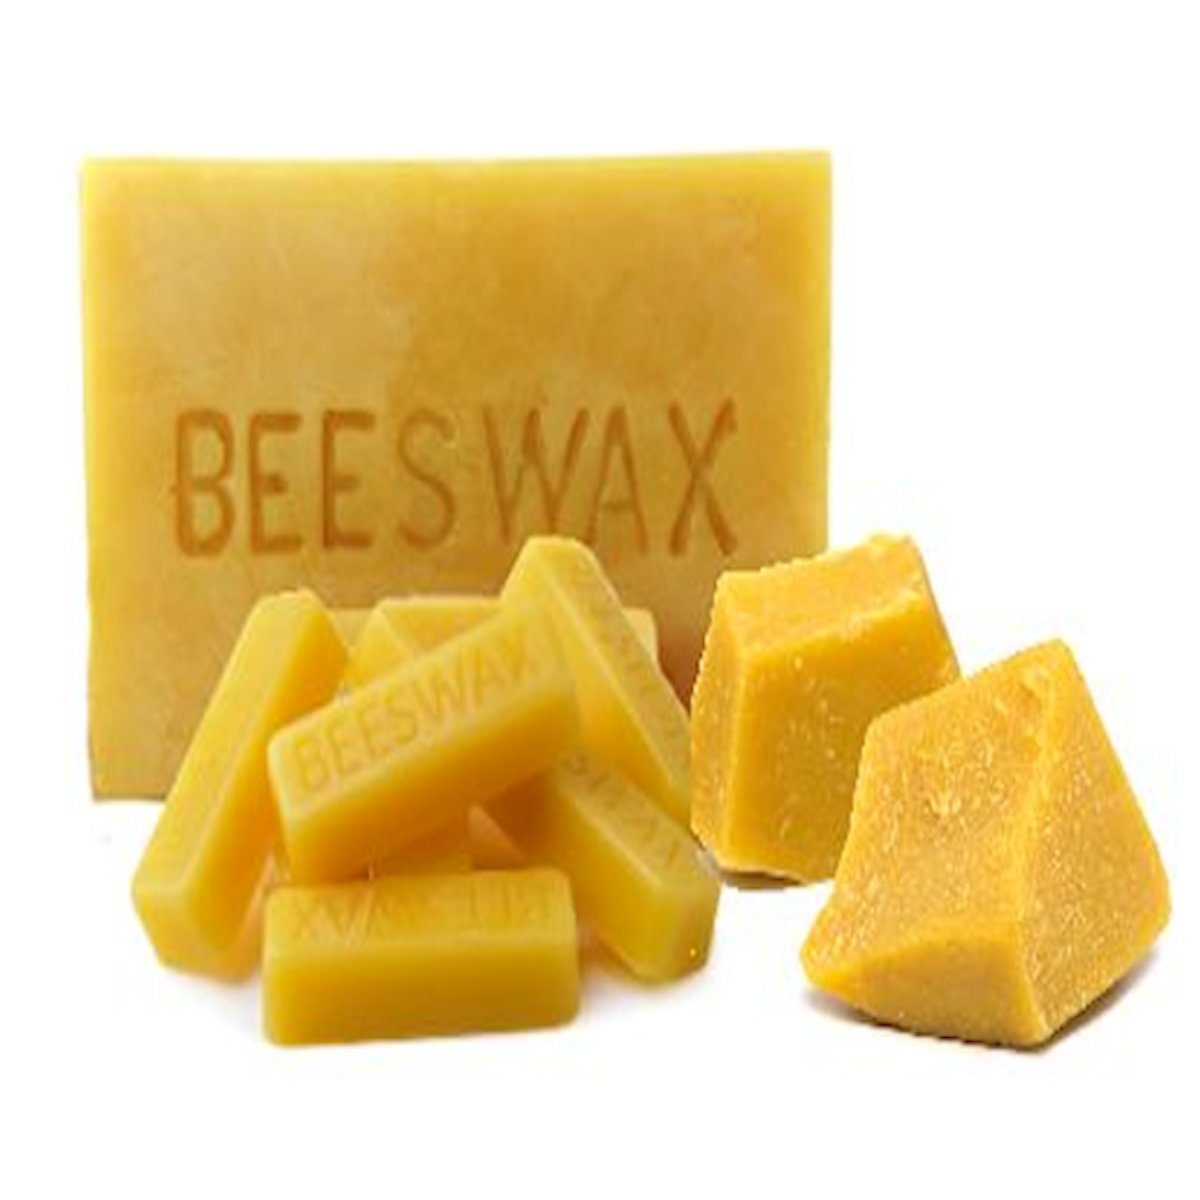 Raw Beeswax ,100 % Pure Beeswax ,natural Beeswax , Beeswax for Candle  Making, Soap Making, Making Supplies 